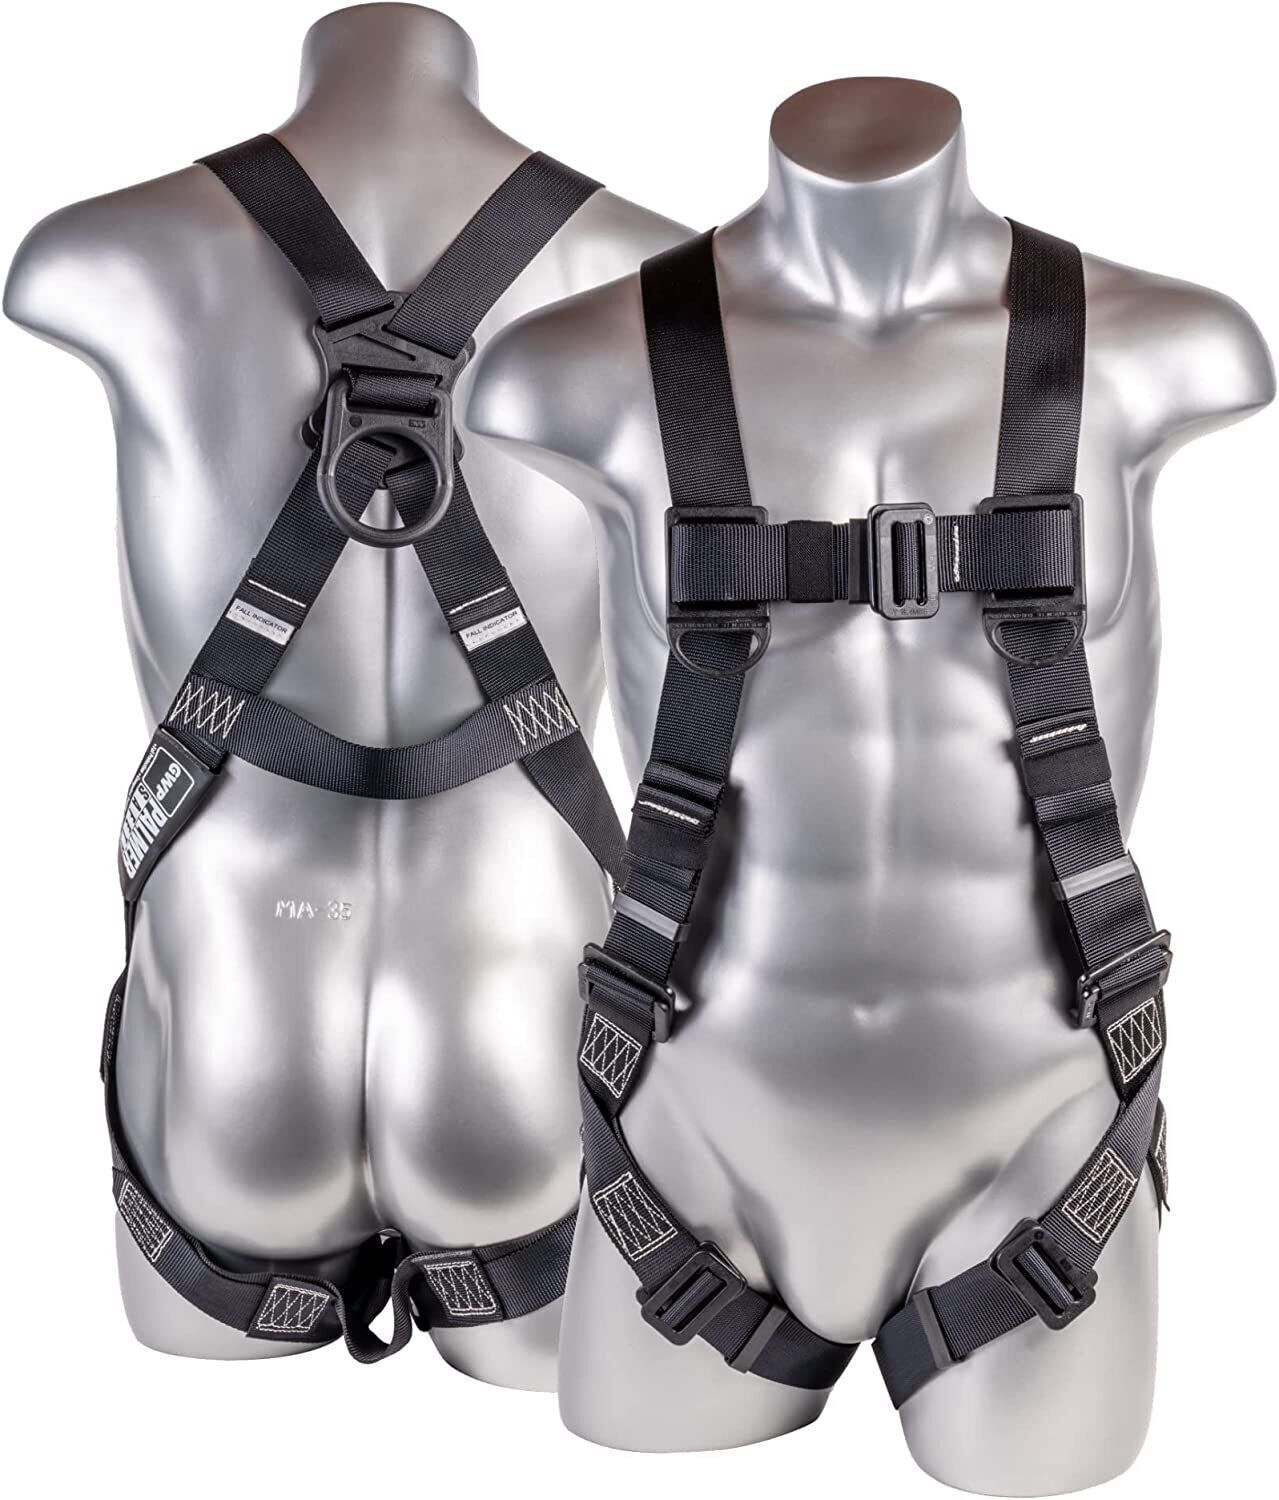 Palmer Safety Dielectric Safety Harness I 5pt Full Body Harness, Pass-through...